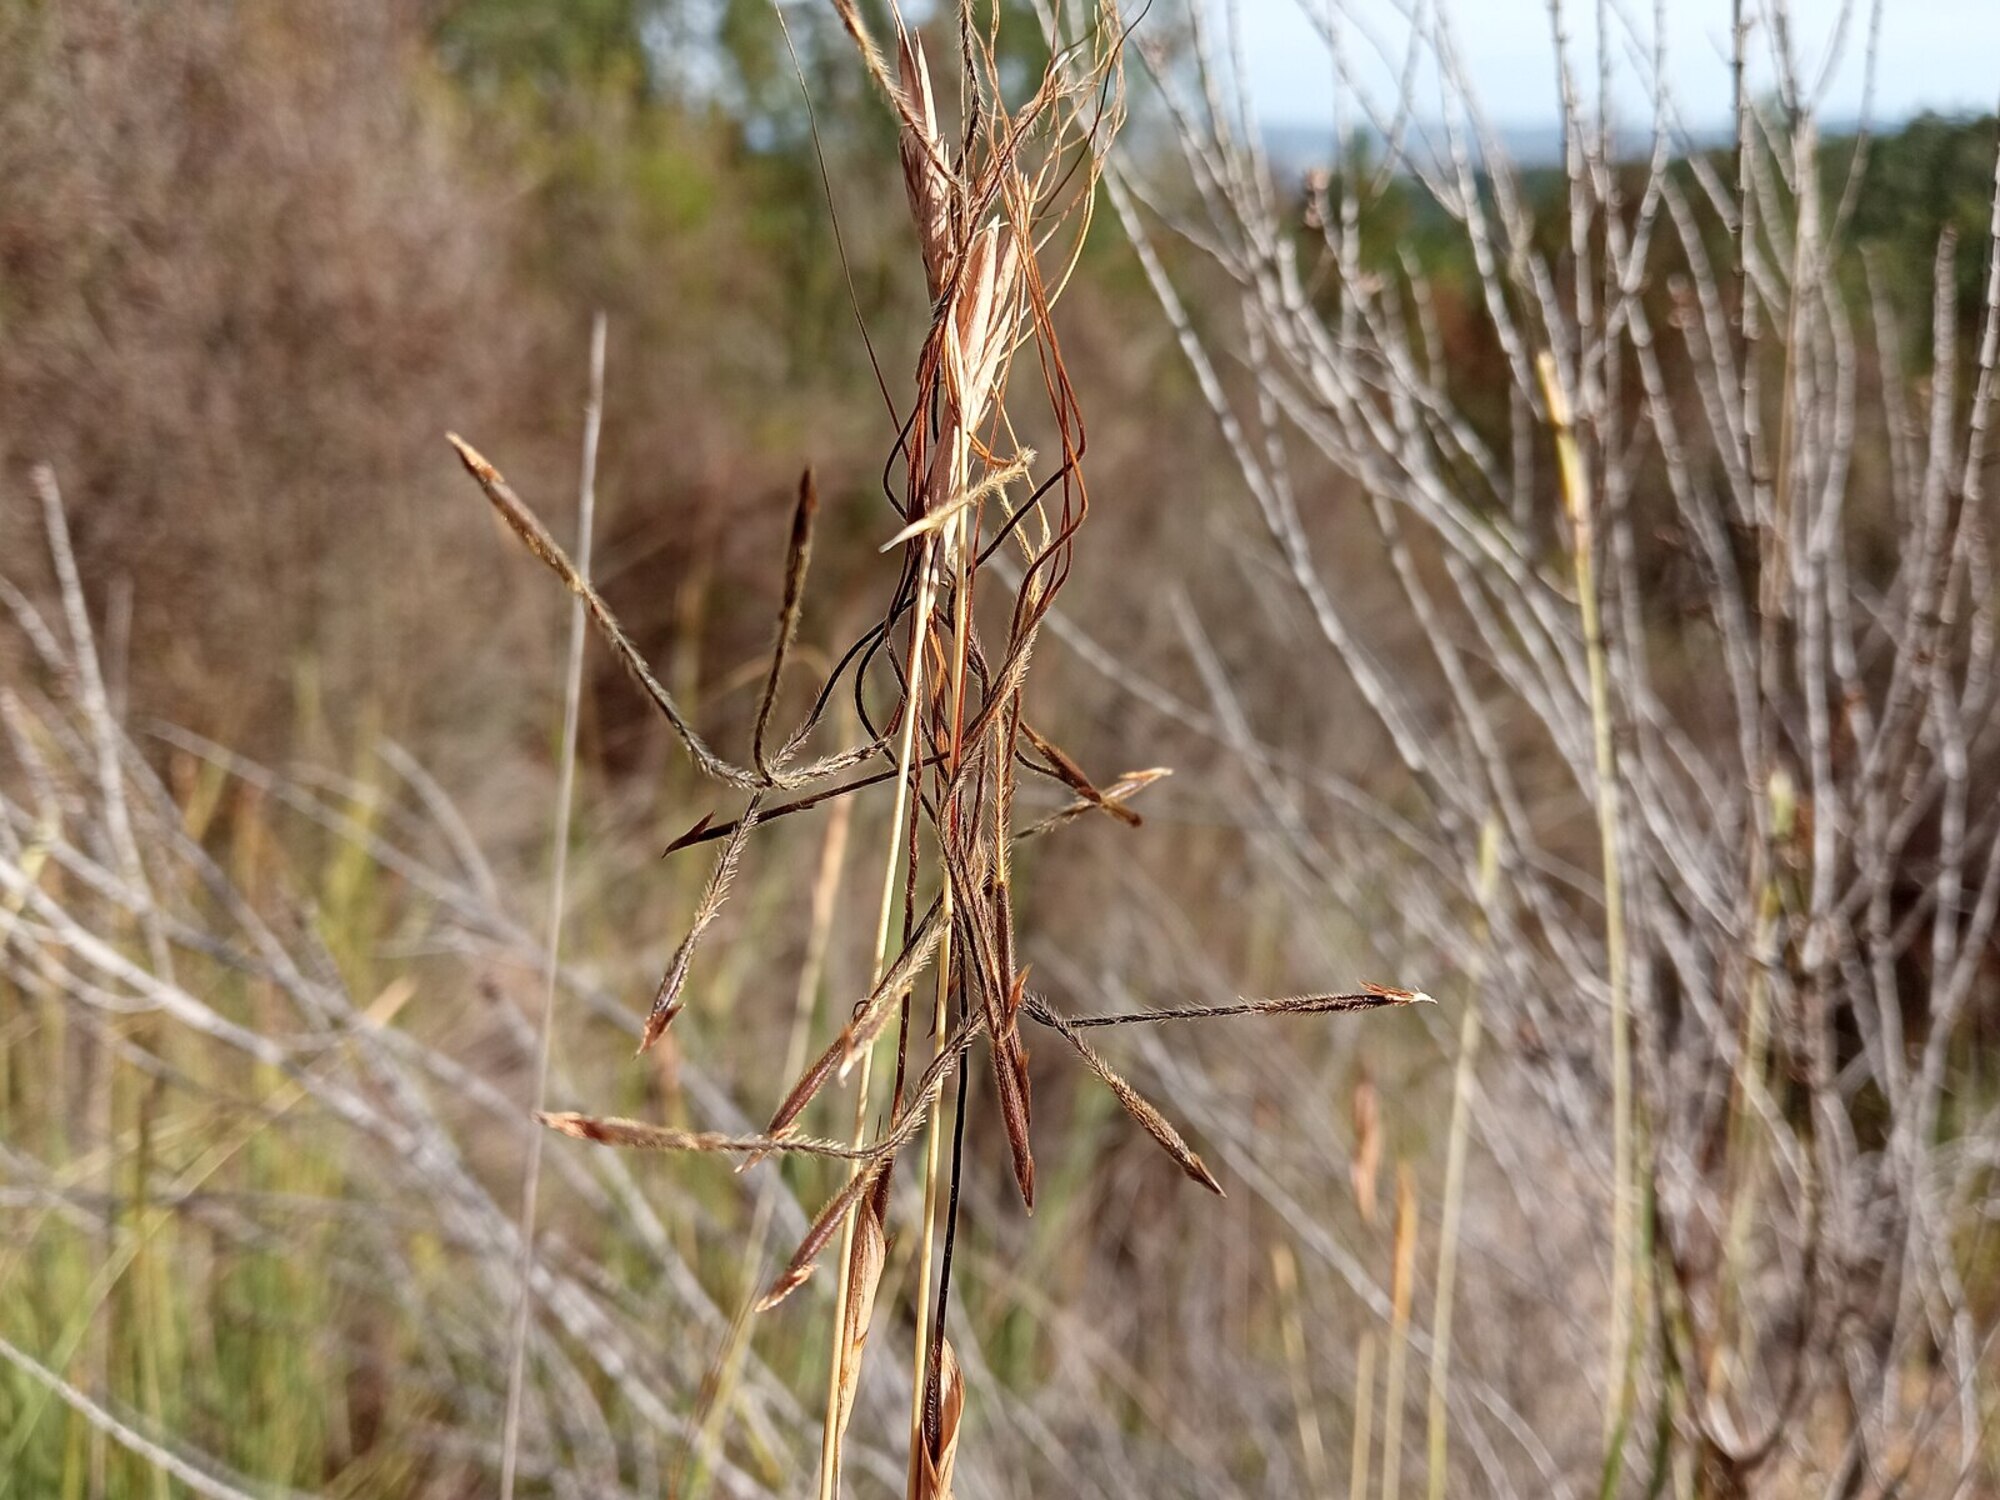 Close-up photograph of a mature tanglehead inflorescence showing the spikelets with long-twisted awns that have arrowhead-like tips and shafts with bristly hairs. The awns are bent and tangled, illustrating how tanglehead got its name.